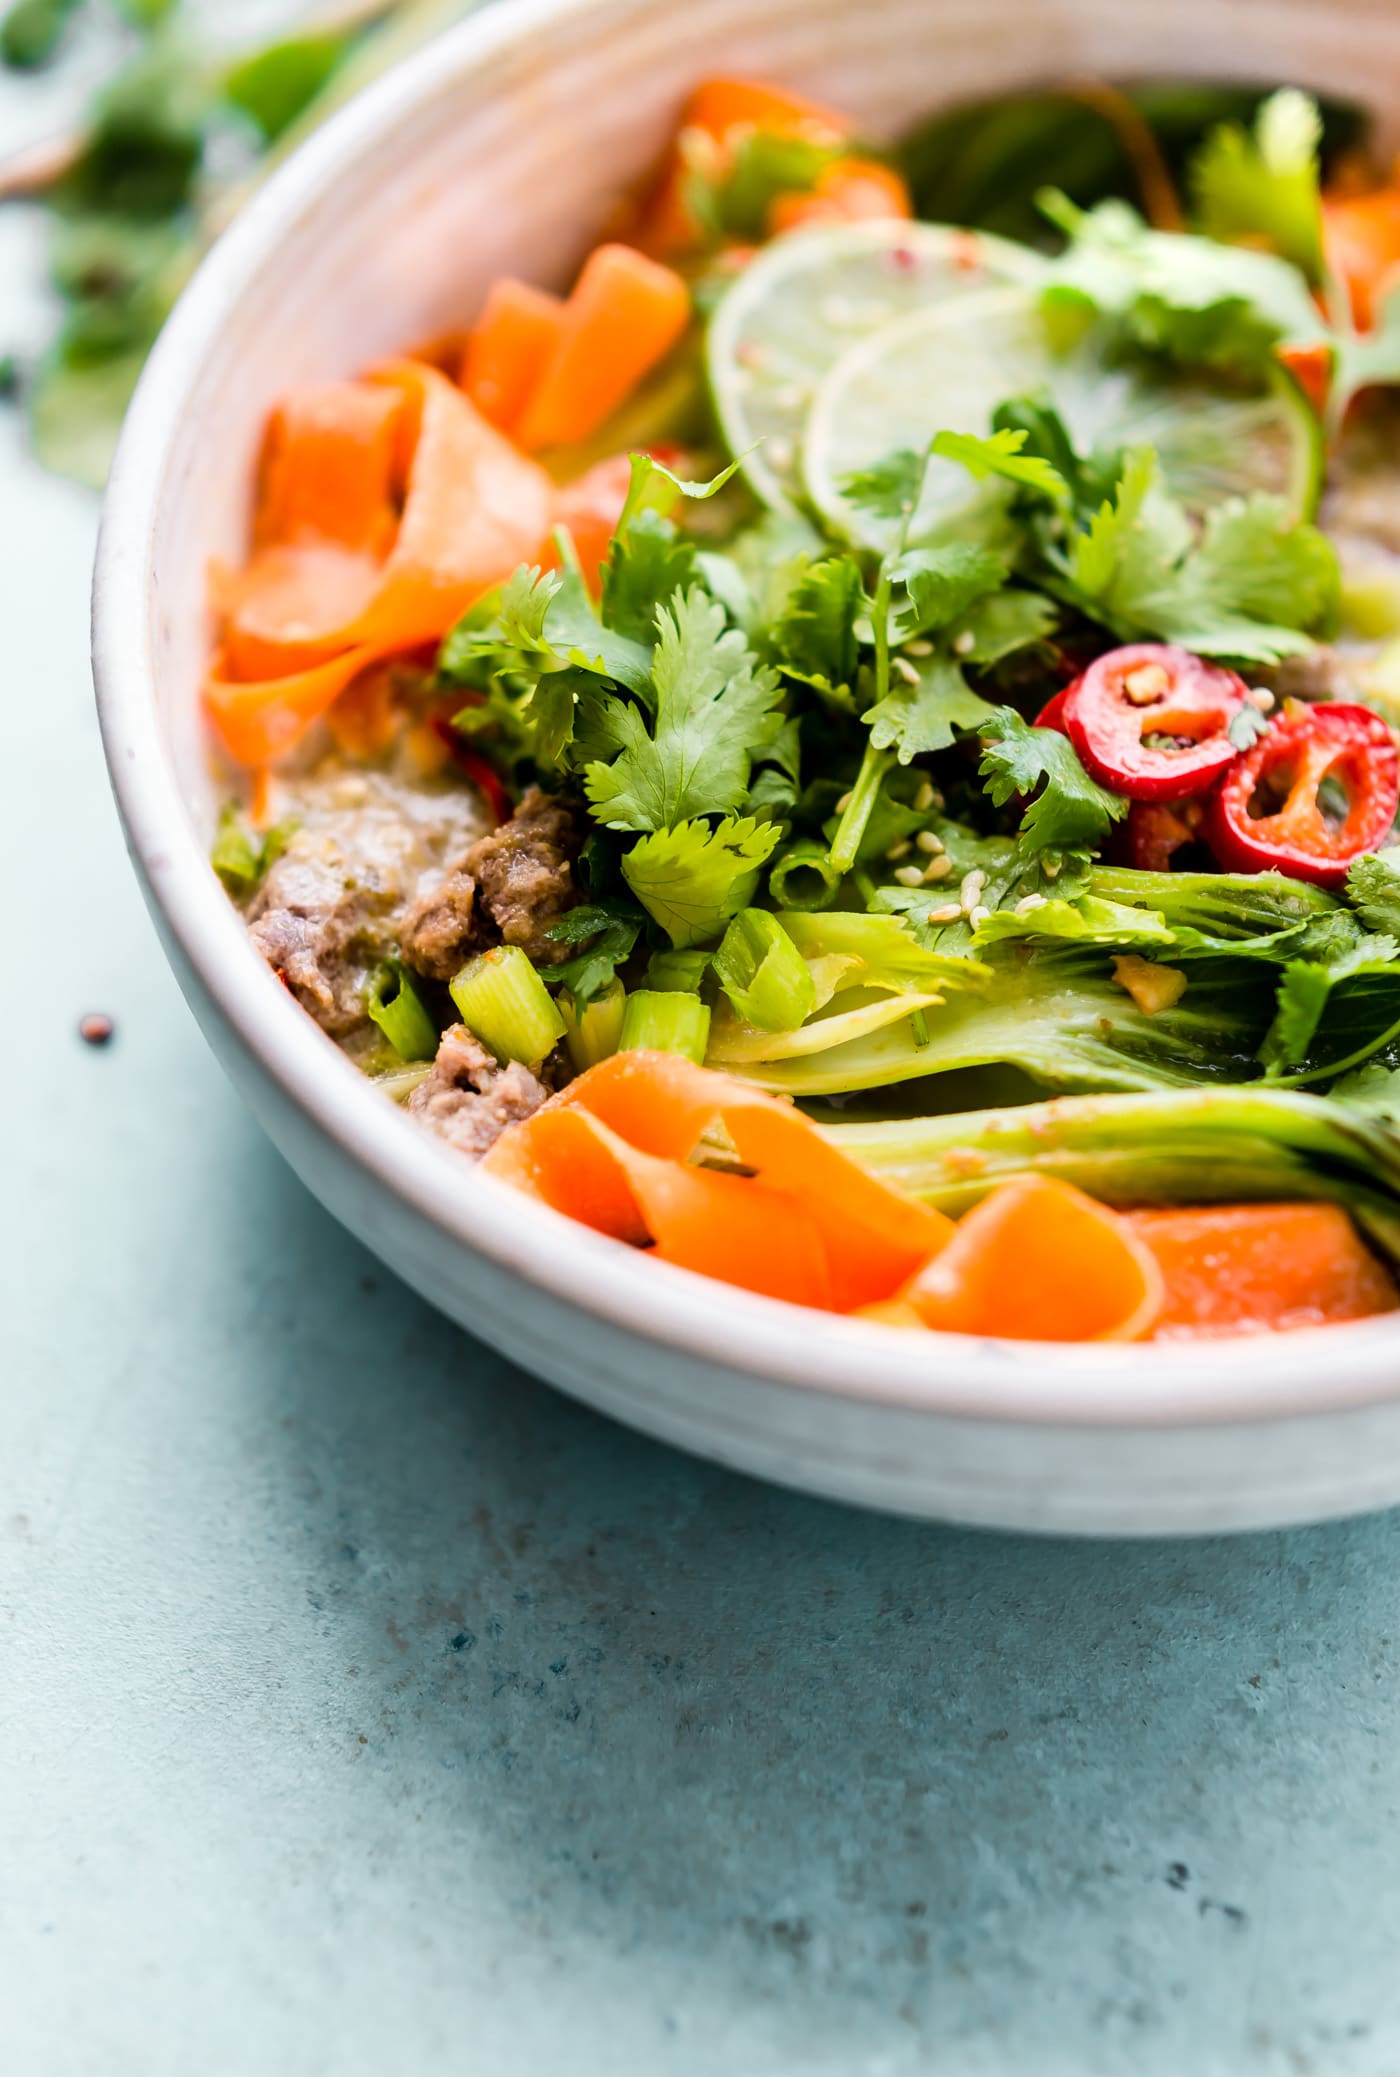 Thai green curry beef and veggies bowl recipe is for both the meat eater and vegetarian palate! A one pot green curry beef recipe that's quick to make and flavorful! No noodles needed, just lots of veggies and a creamy Thai broth! Paleo, Whole 30 friendly